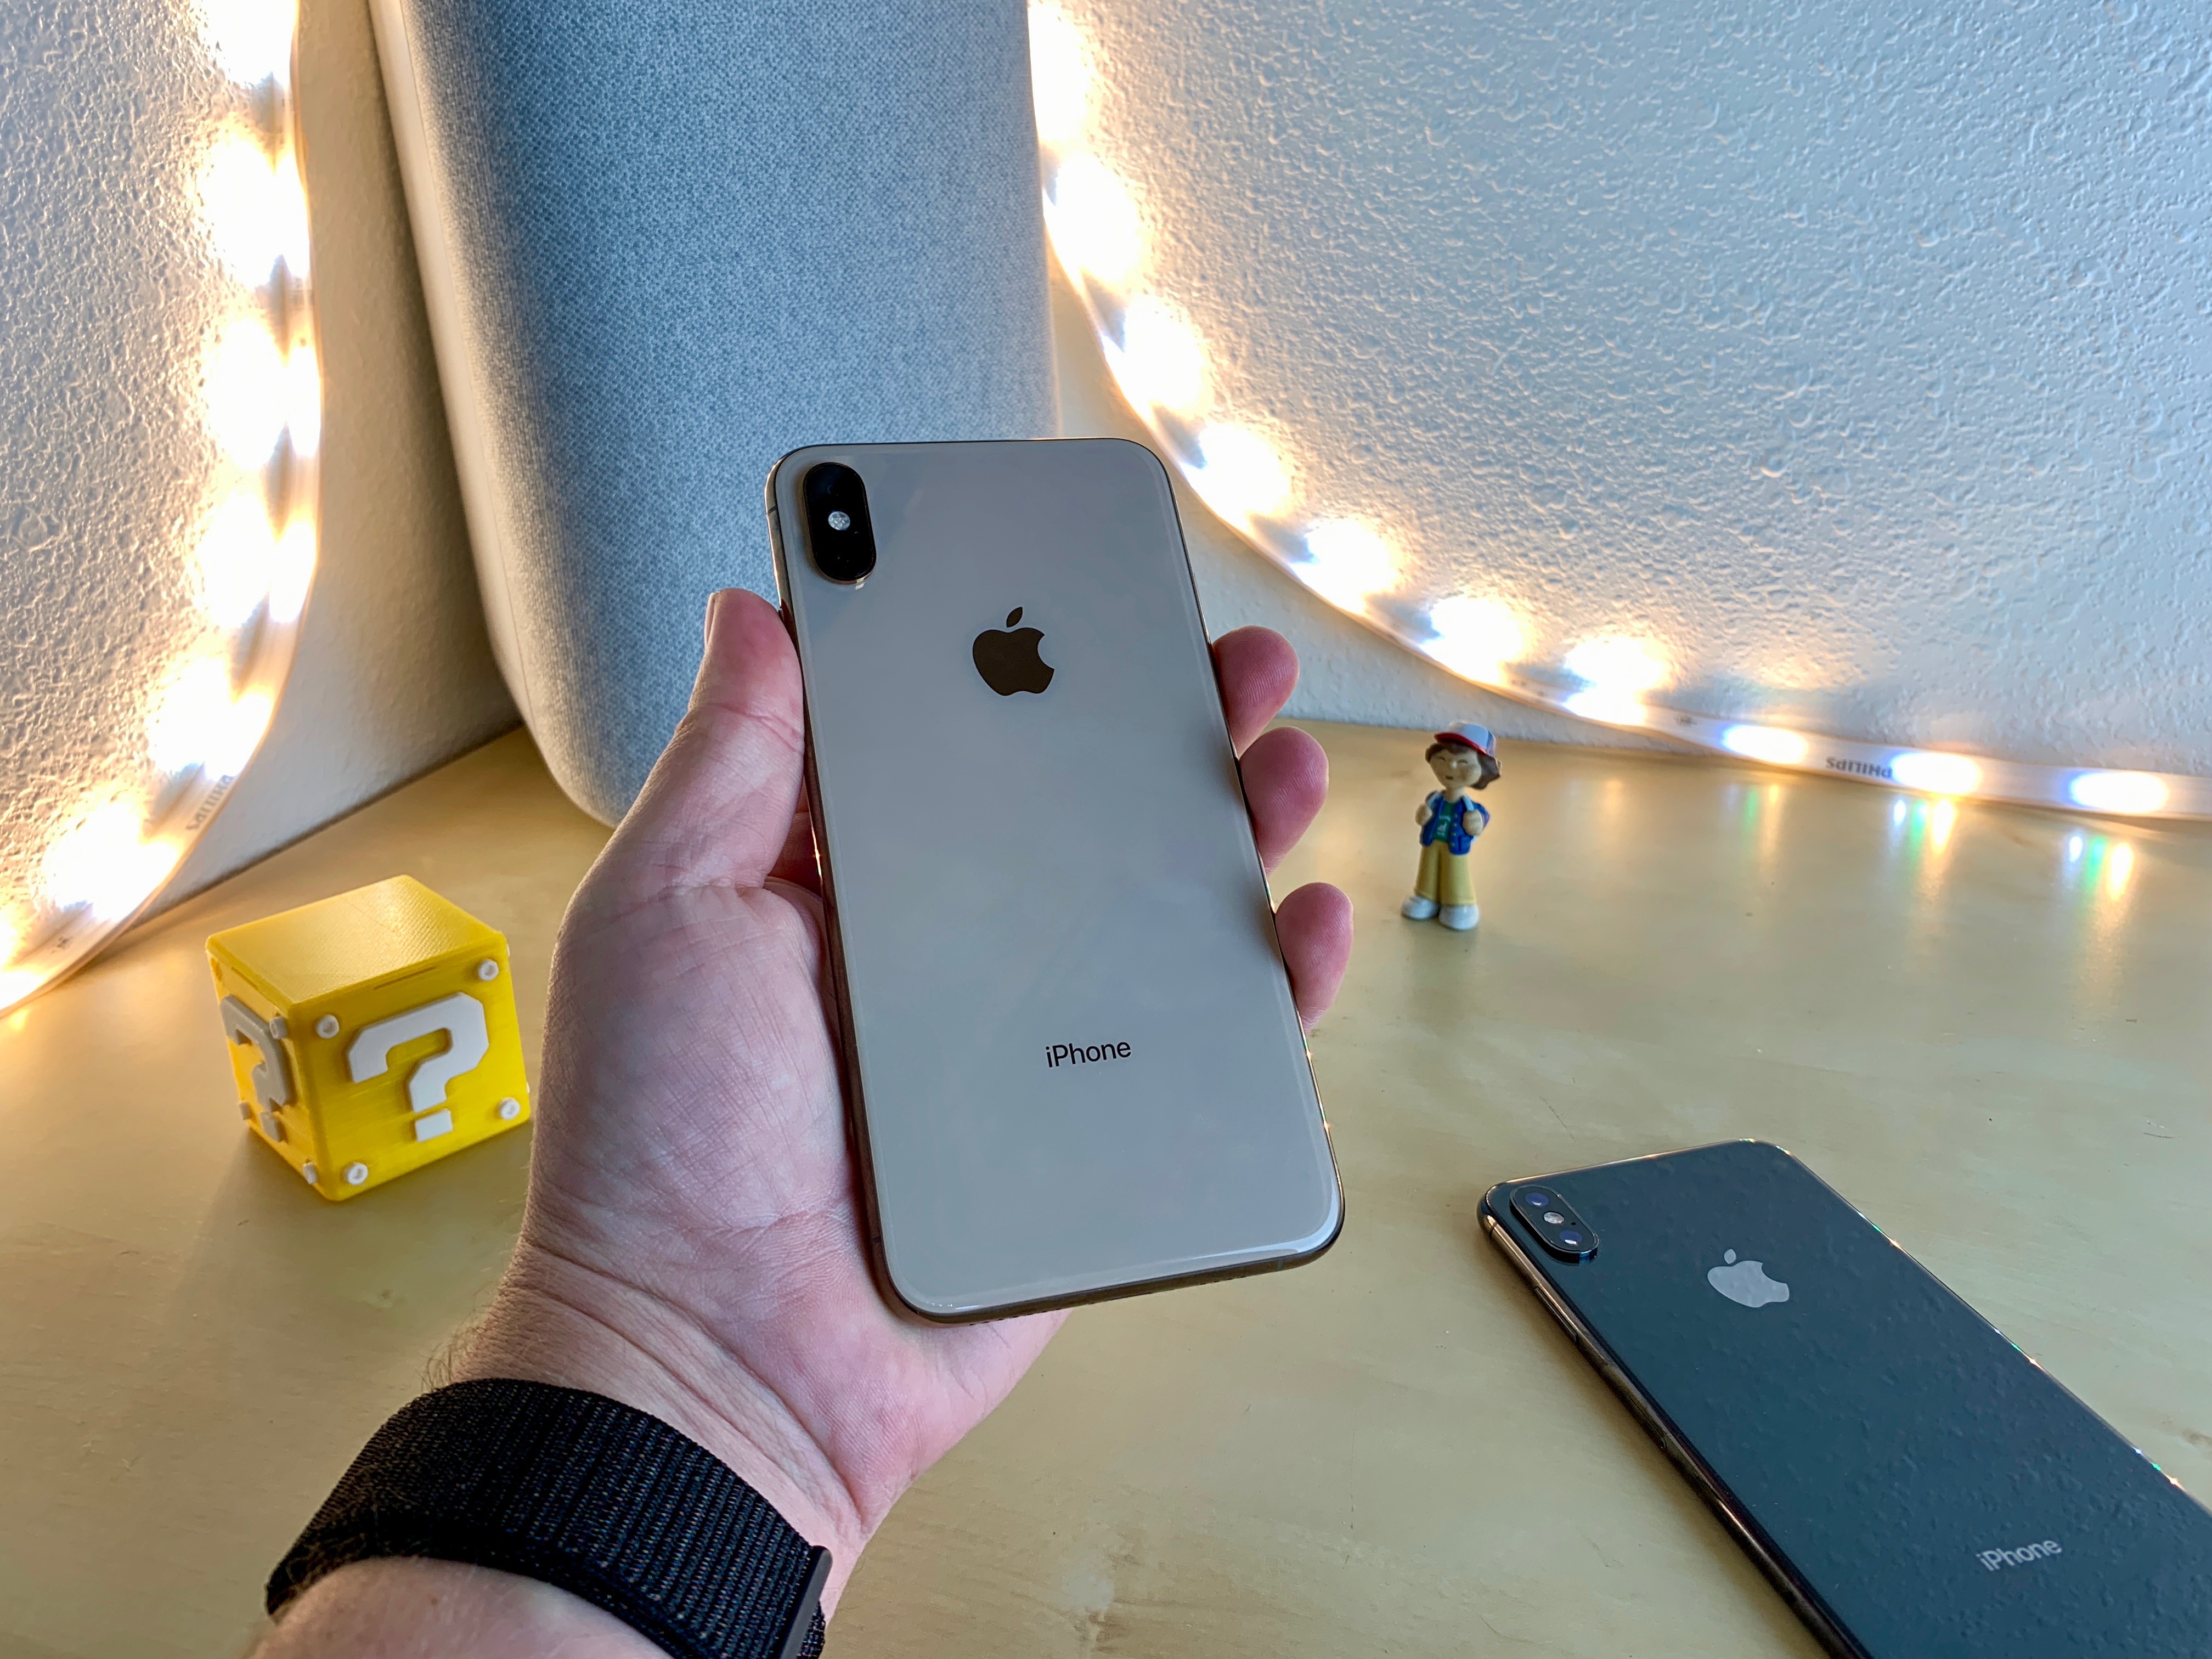 Apple iPhone Xs Max - Full Specification, price, review